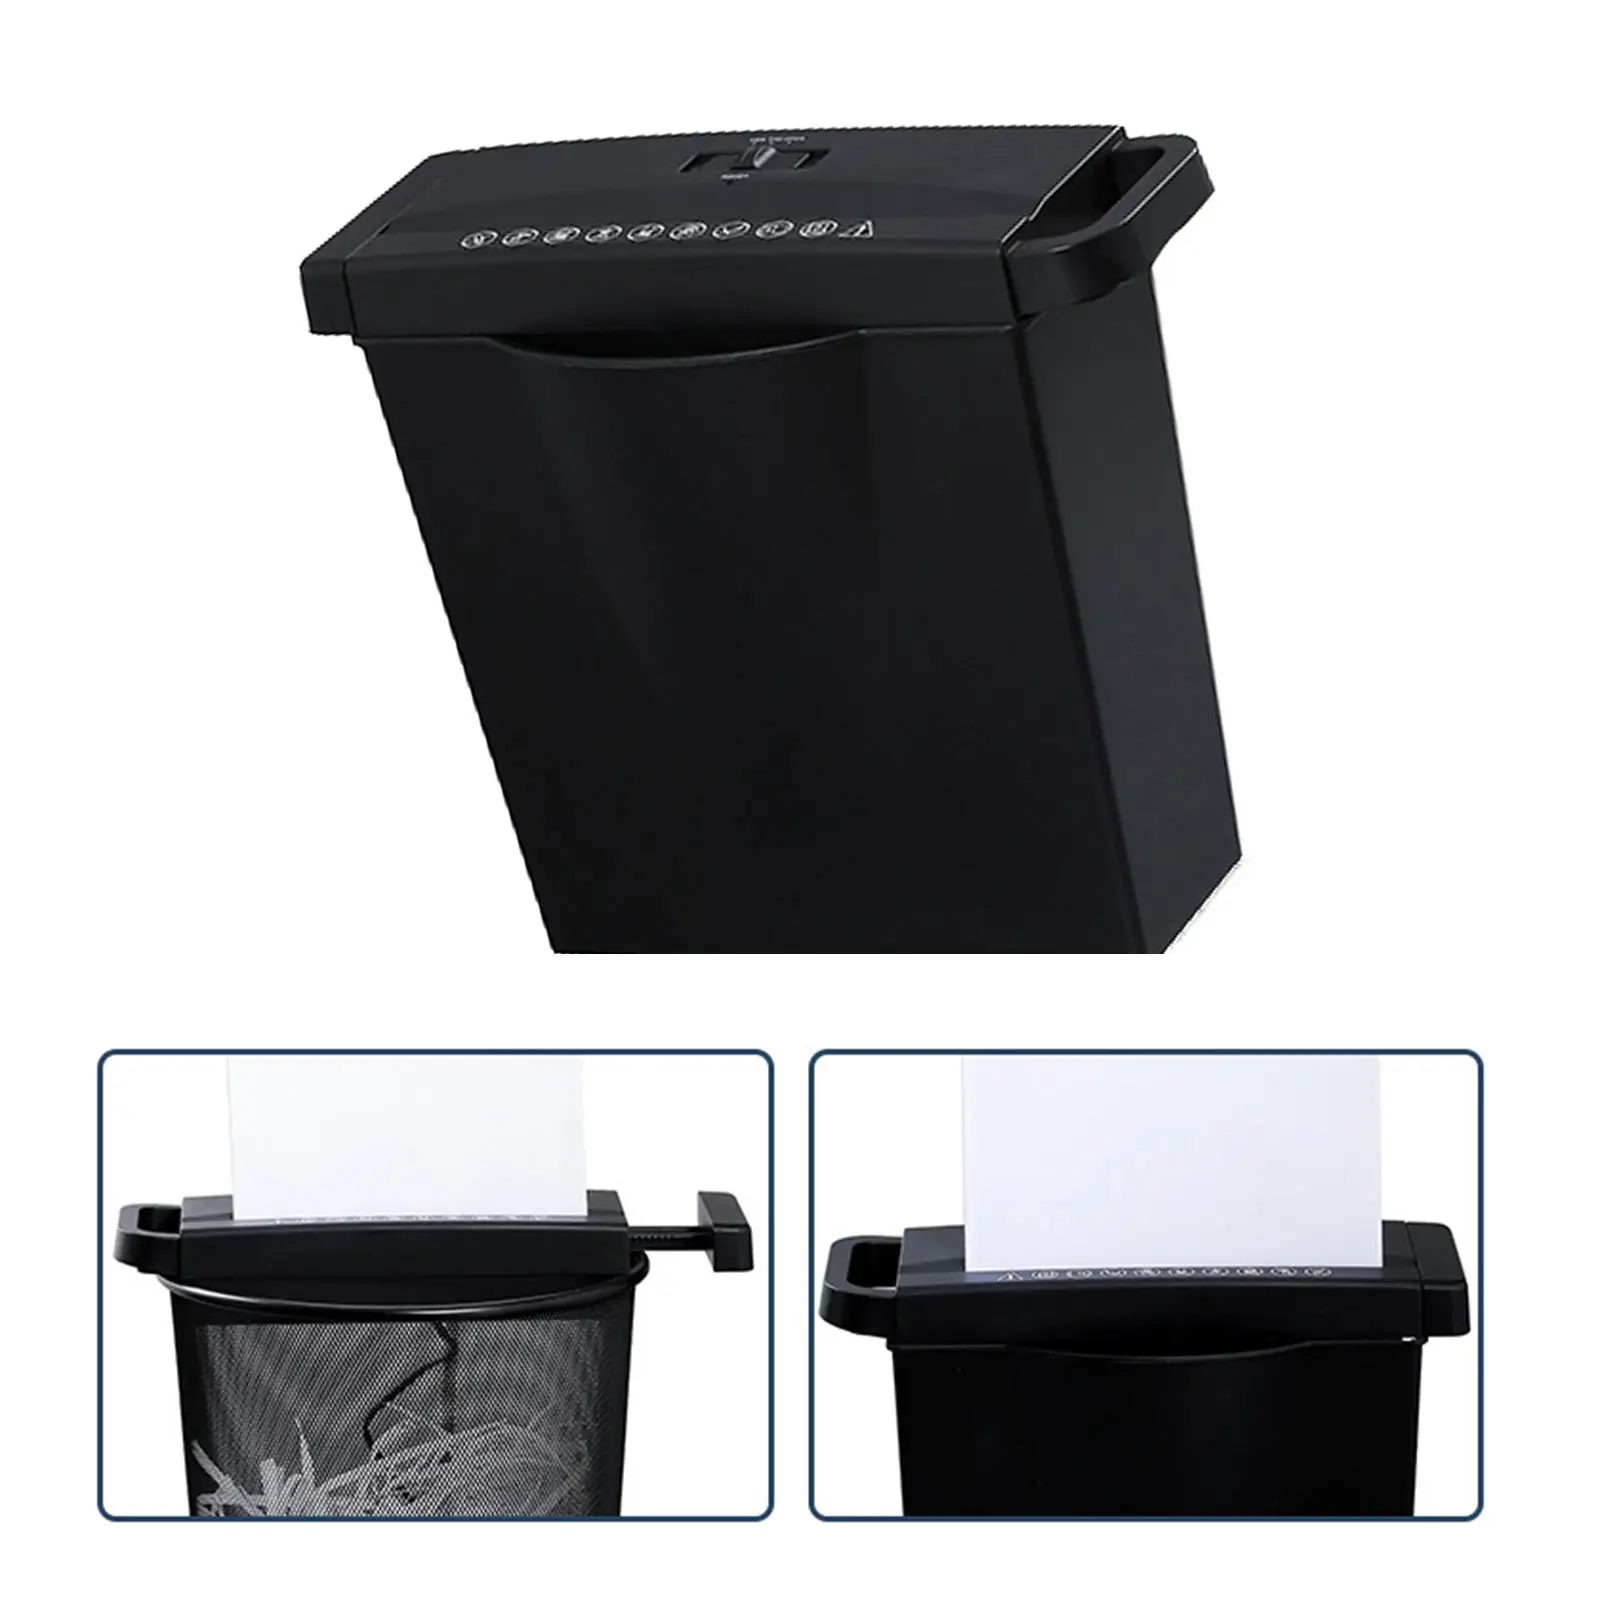 6-Sheet Strip Cut Paper Shredder Micro-Cut Paper Photos Portable Electric Silent A4 Office Shredder Home Office Use 7L Capacity